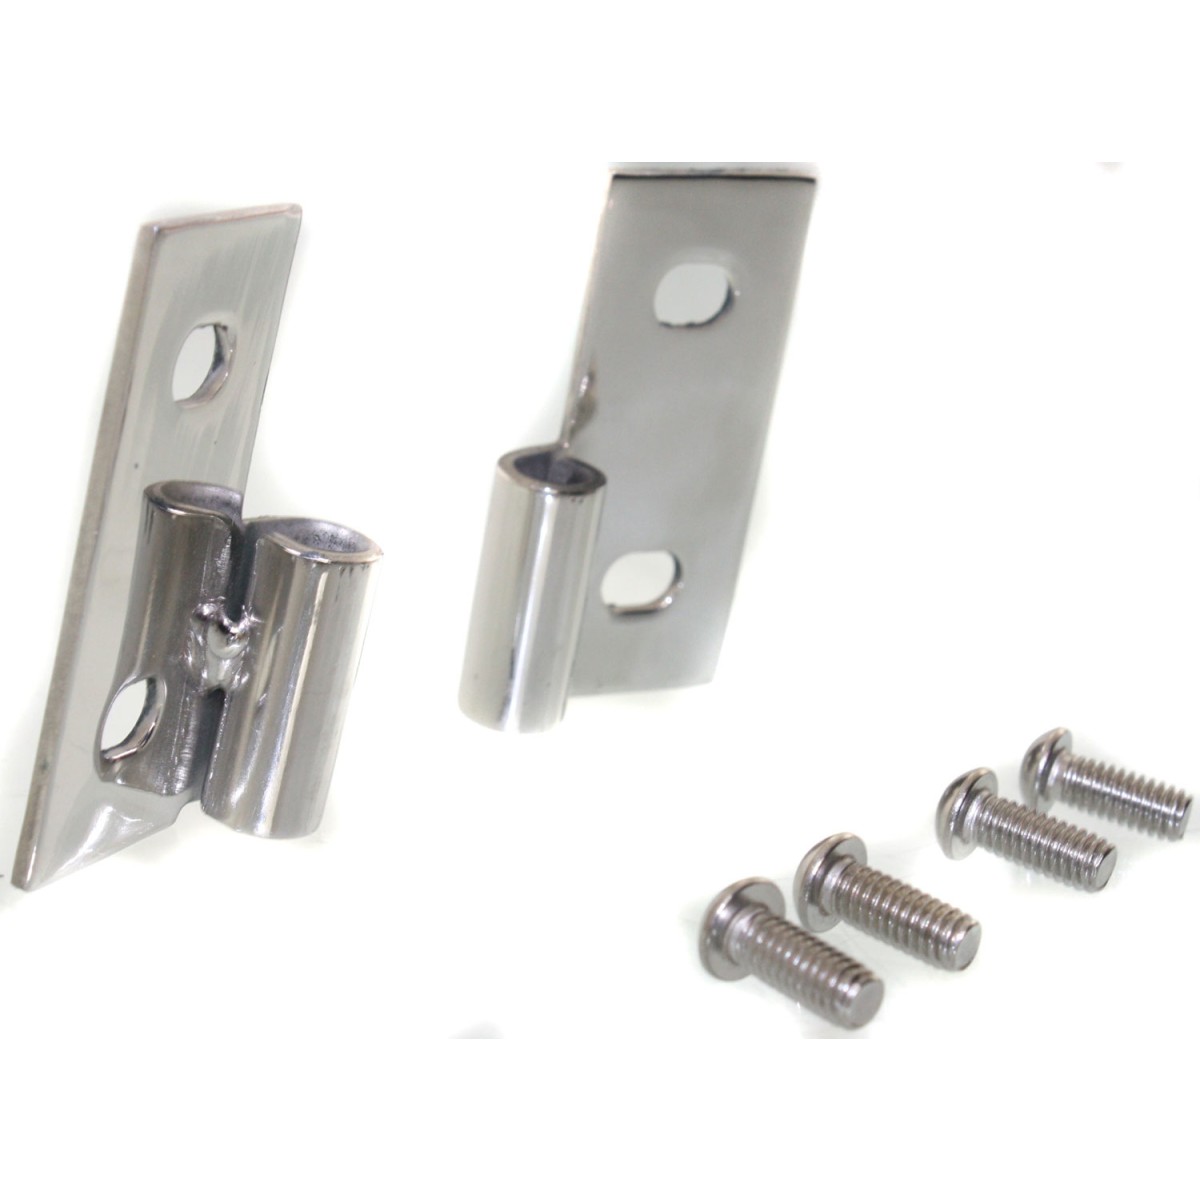 Pair Set of 2 Door Hinges Left-and-Right LH & RH for Jeep Wrangler CJ7 ...